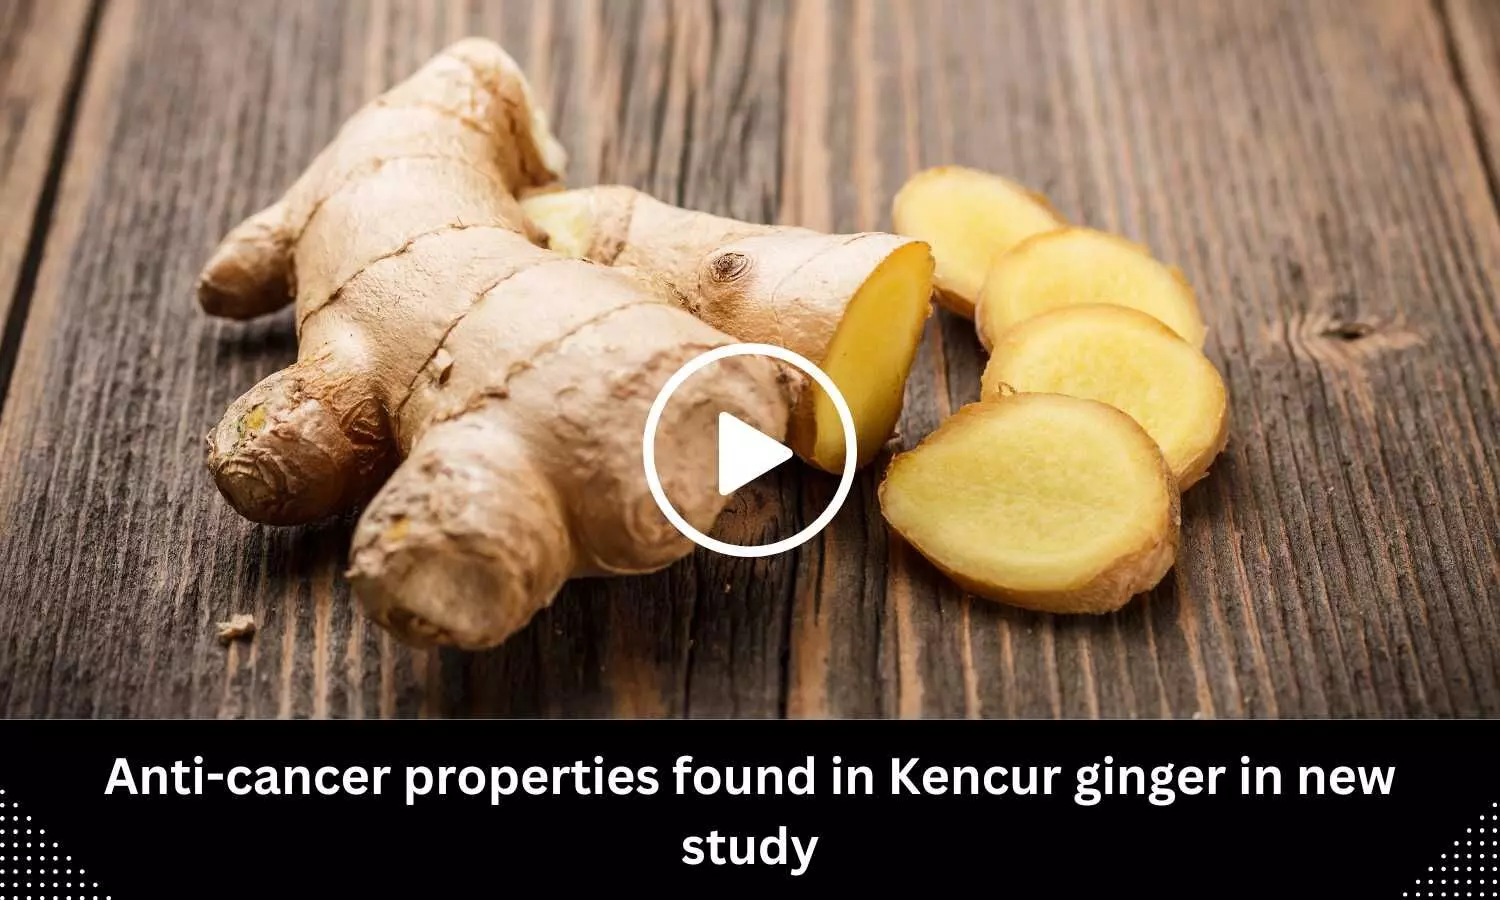 Anti-cancer properties found in Kencur ginger in new study